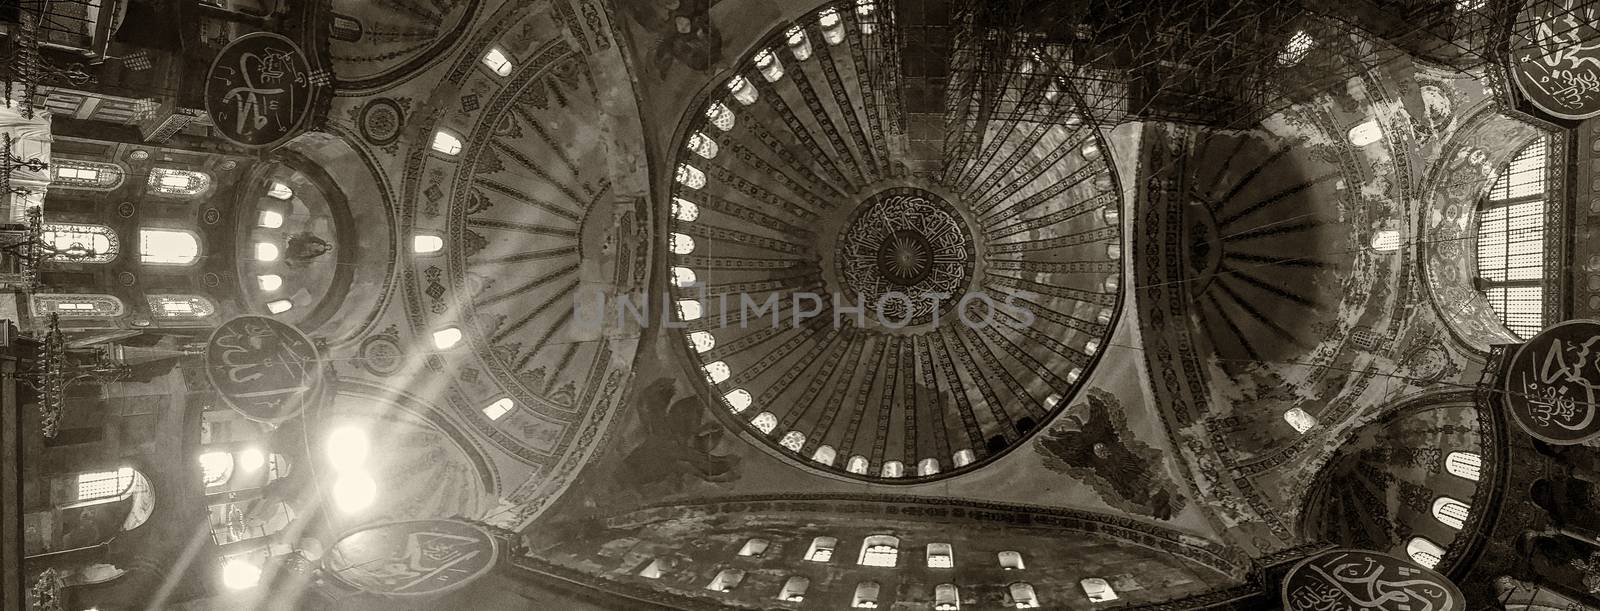 ISTANBUL,TURKEY - SEP 20: Tourists visit Hagia Sophia on September 20, 2014 in Istanbul, Turkey. Hagia Sophia is a former Orthodox patriarchal basilica, later a mosque and now a museum